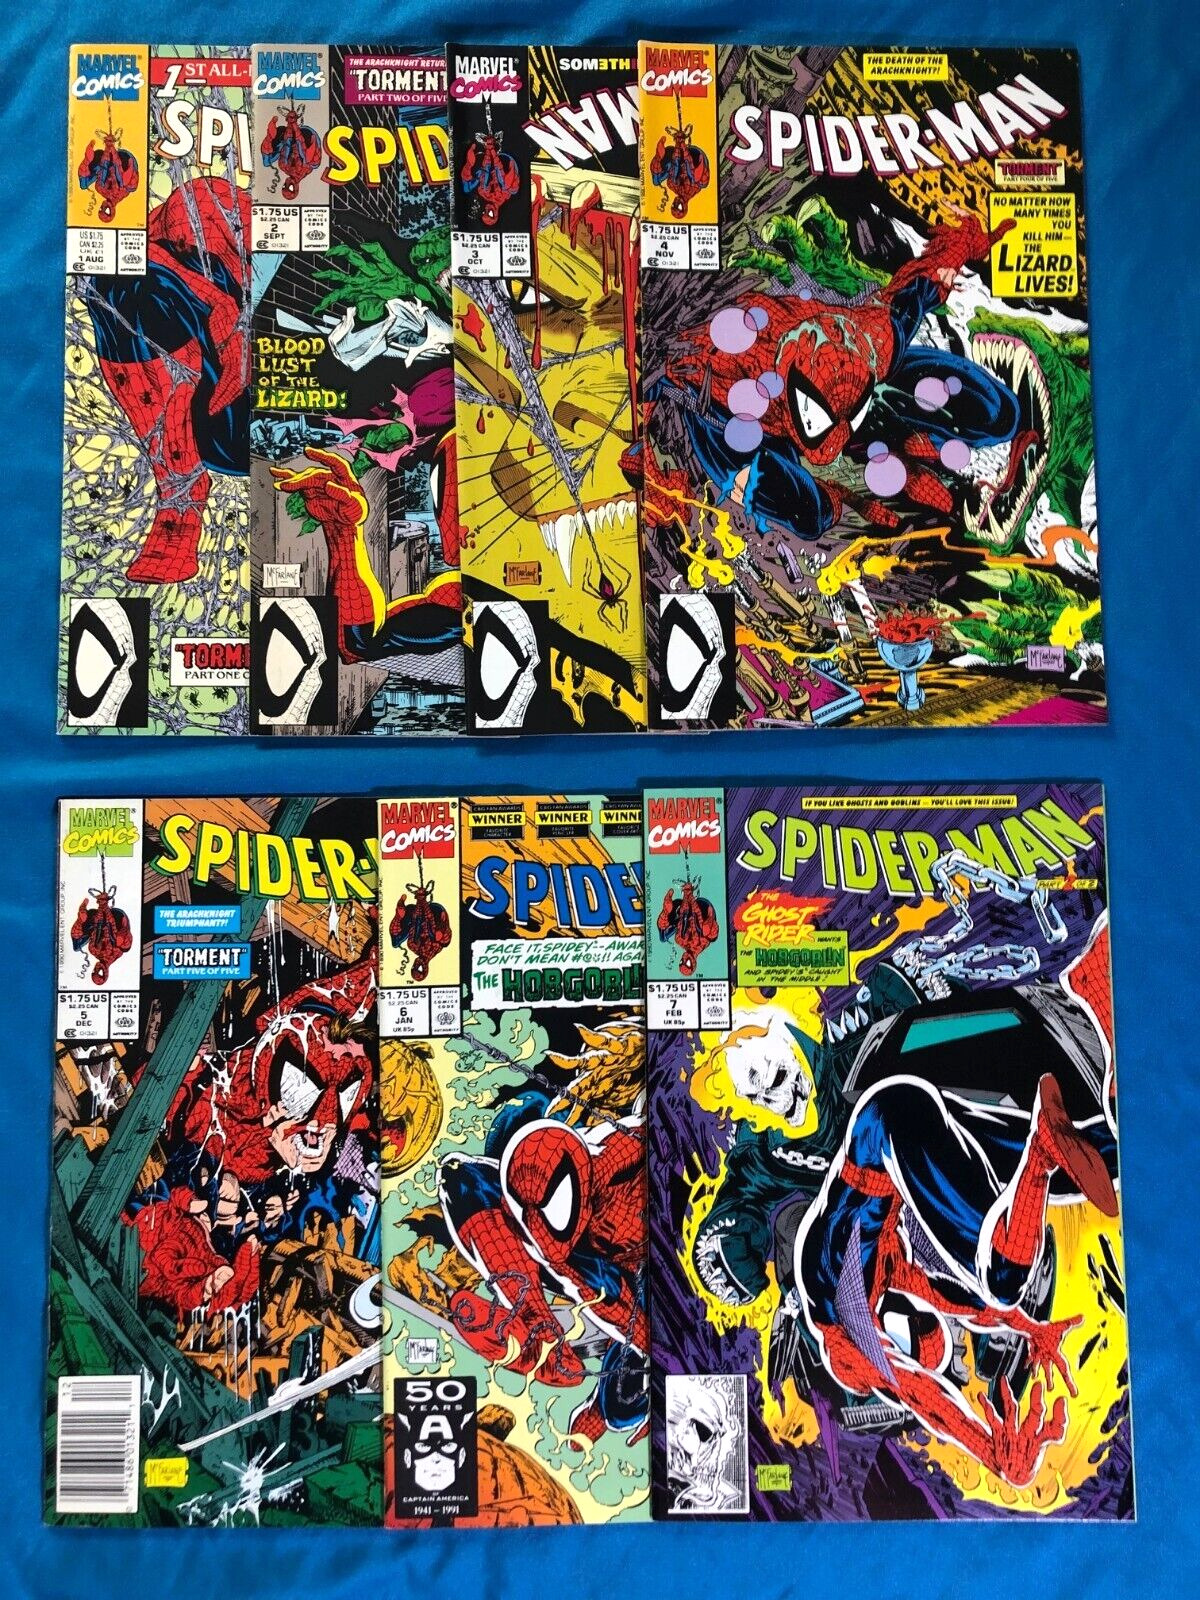 Spider-Man # 1 - 7 (1990) Green Lot Full TORMENT Story + Masques High Grade NM-